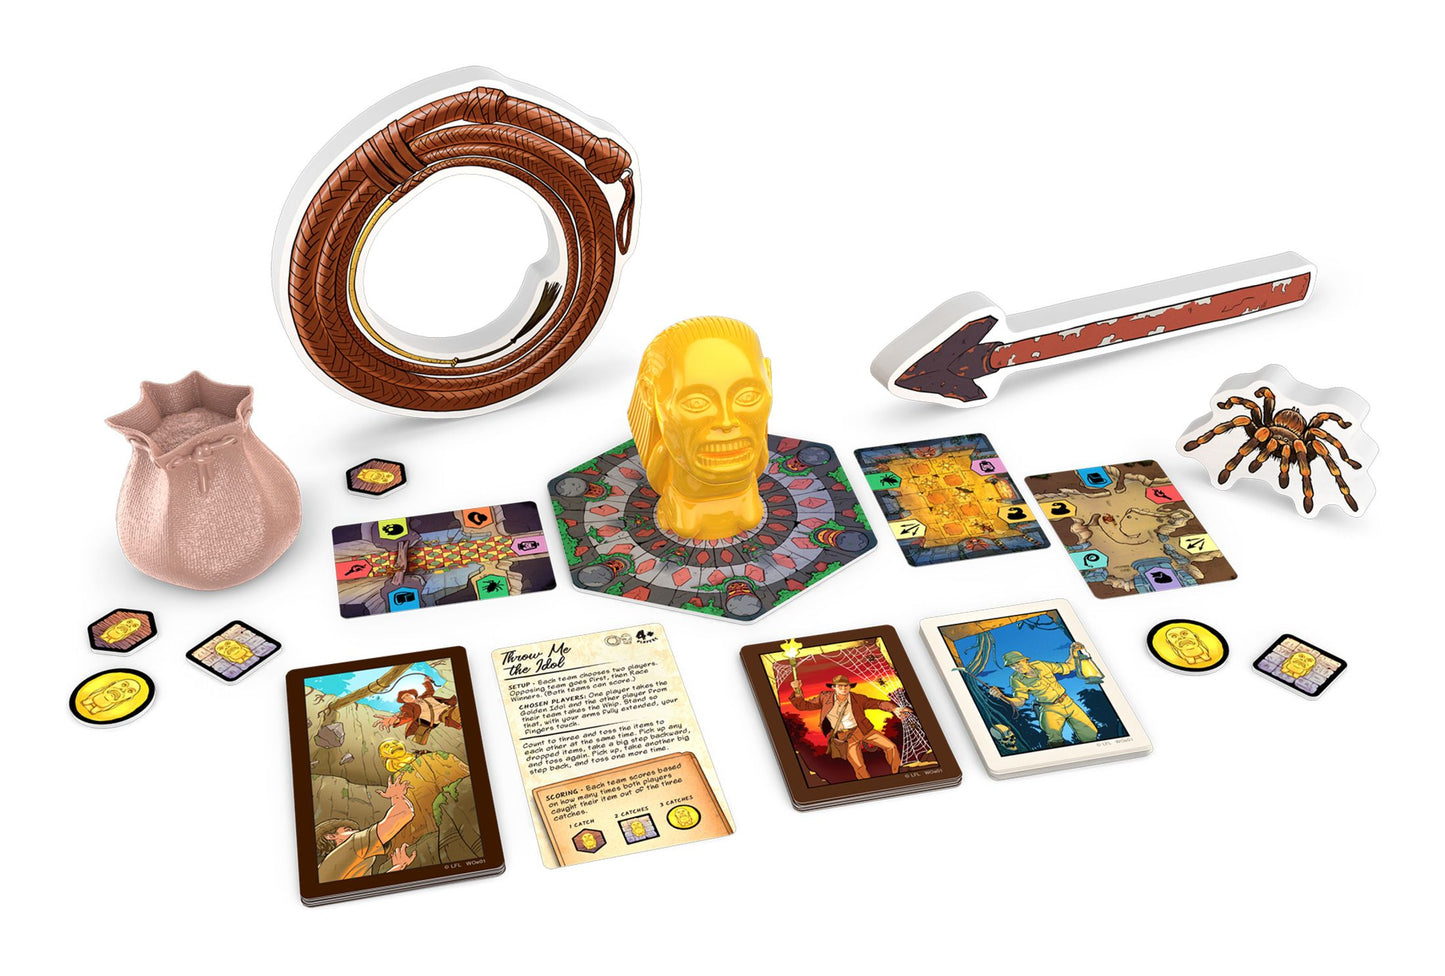 Indiana Jones Throw Me The Idol - a daring game of treasure and adventure! Funko Games. Sold by Board Hoarders